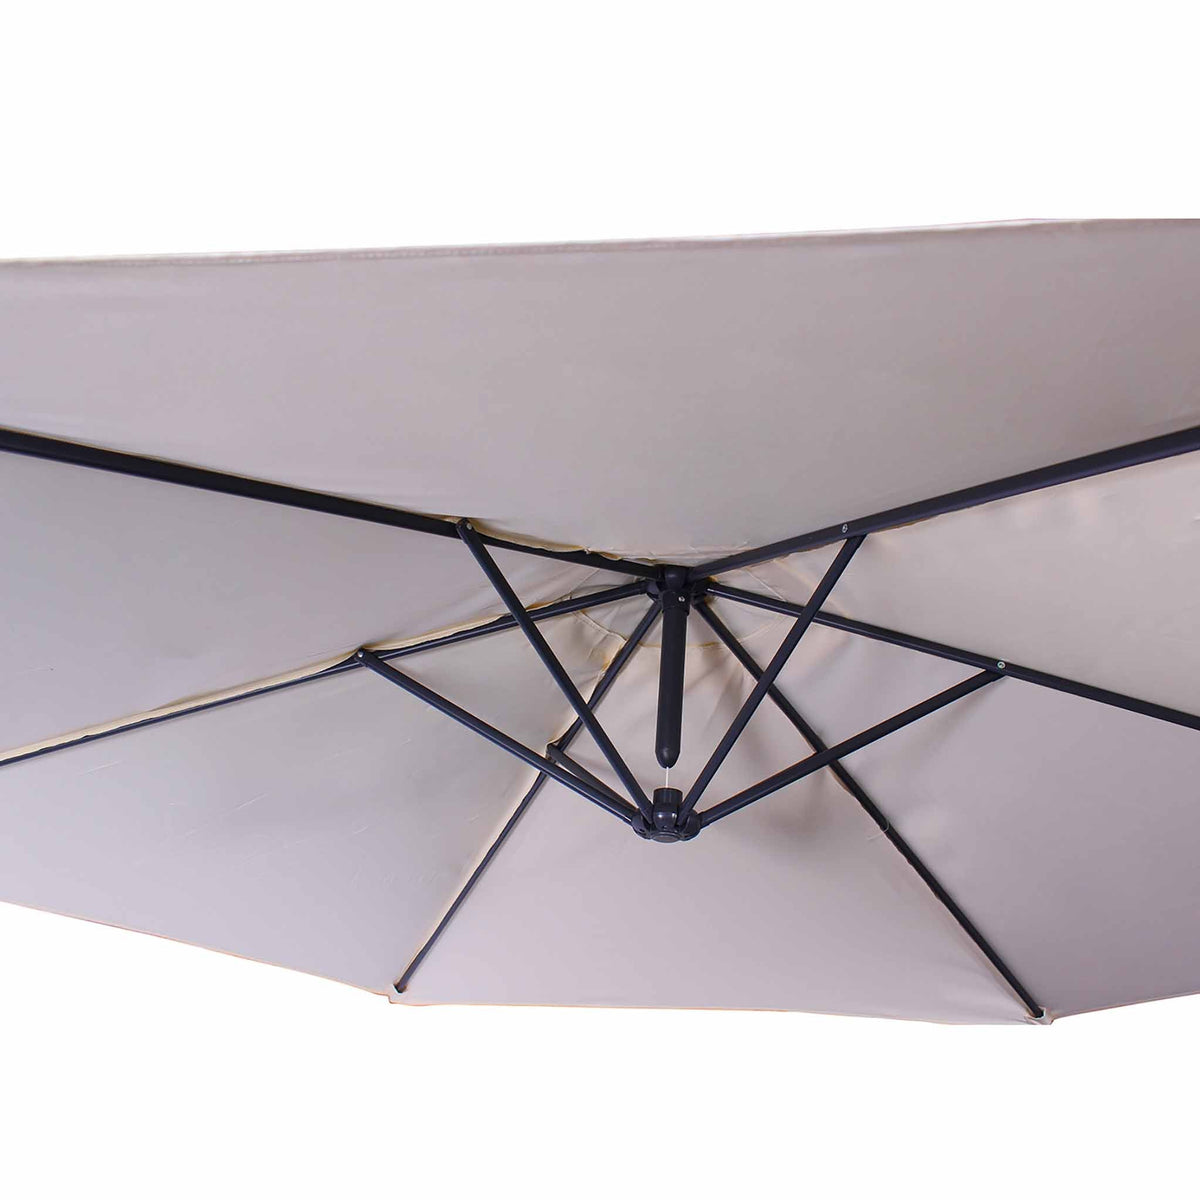 close up of the polyester fabric on the 3m Crank & Tilt Ivory Outdoor Cantilever Patio Parasol